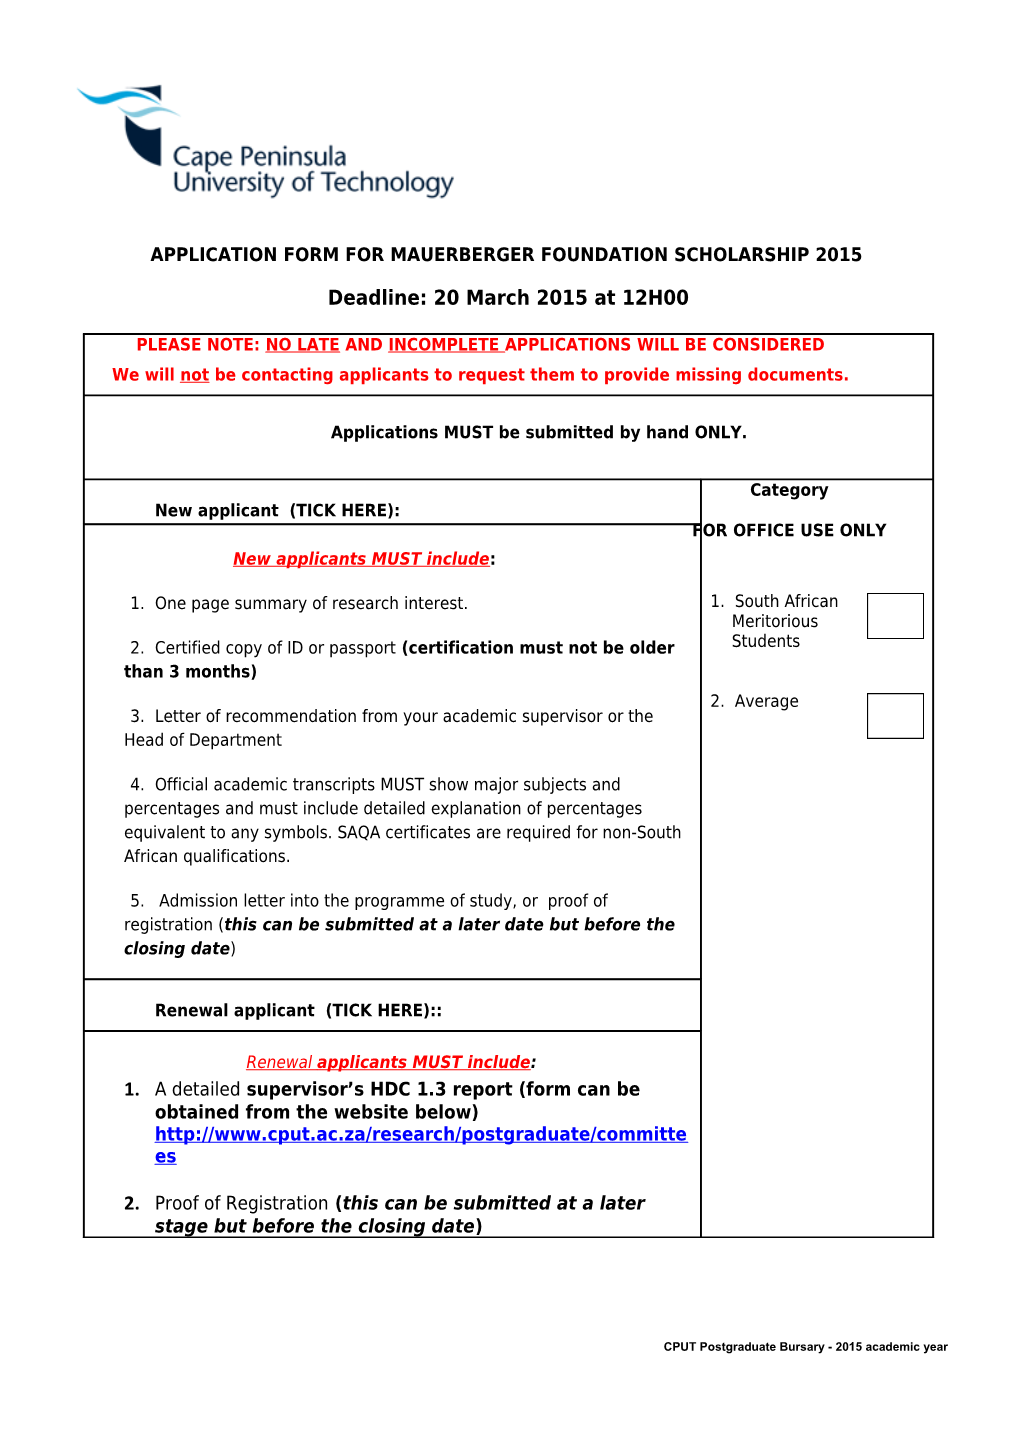 Application Form for Mauerberger Foundation Scholarship 2015